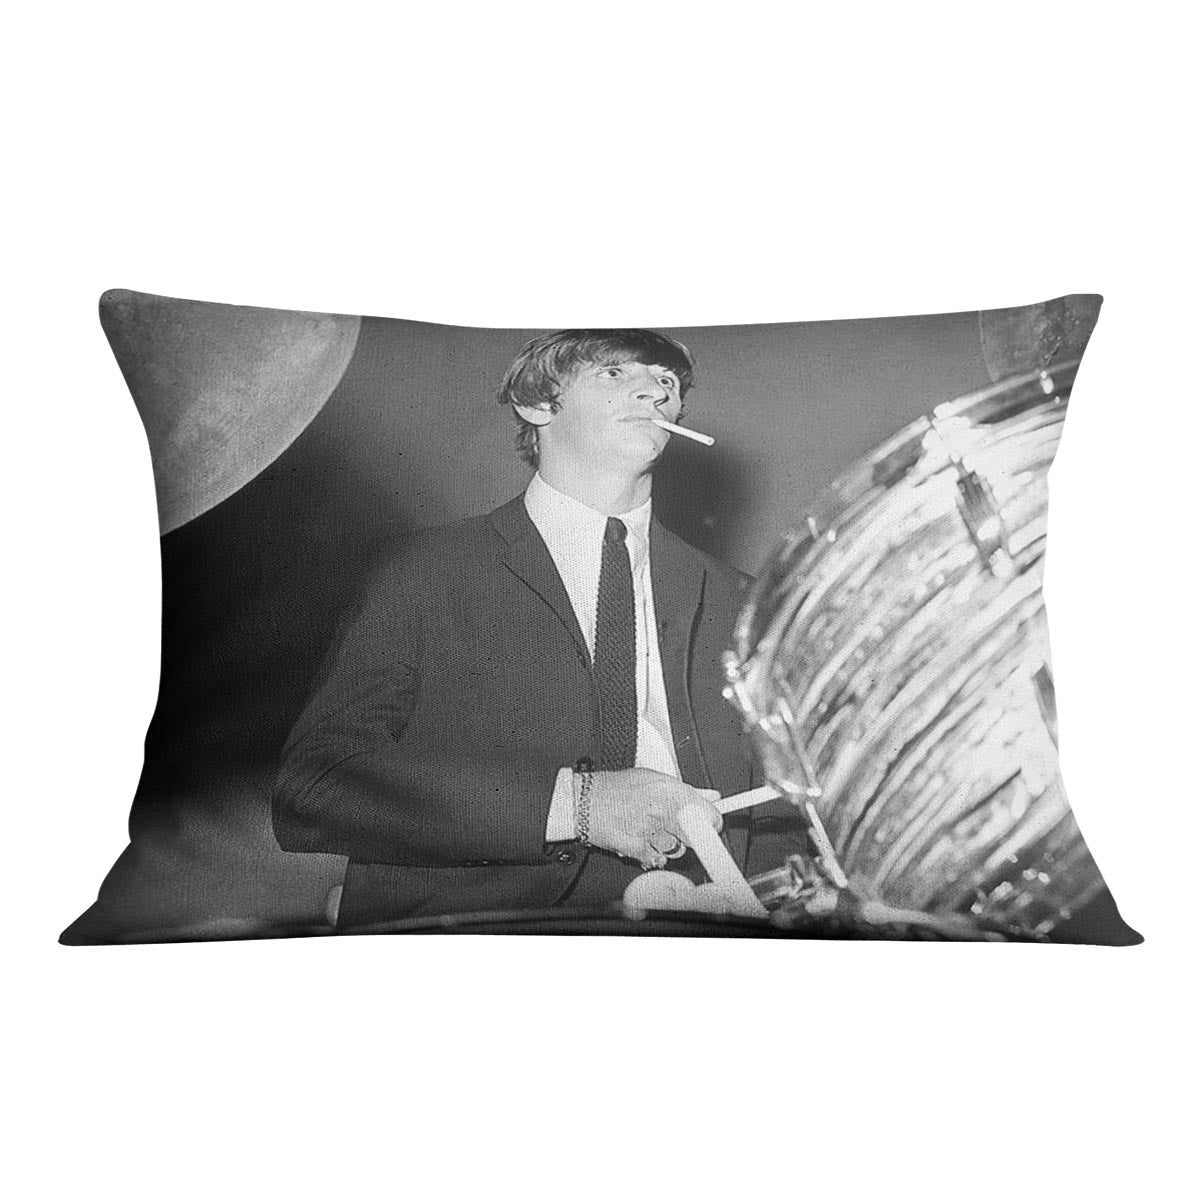 Ringo Starr playing the drums Cushion